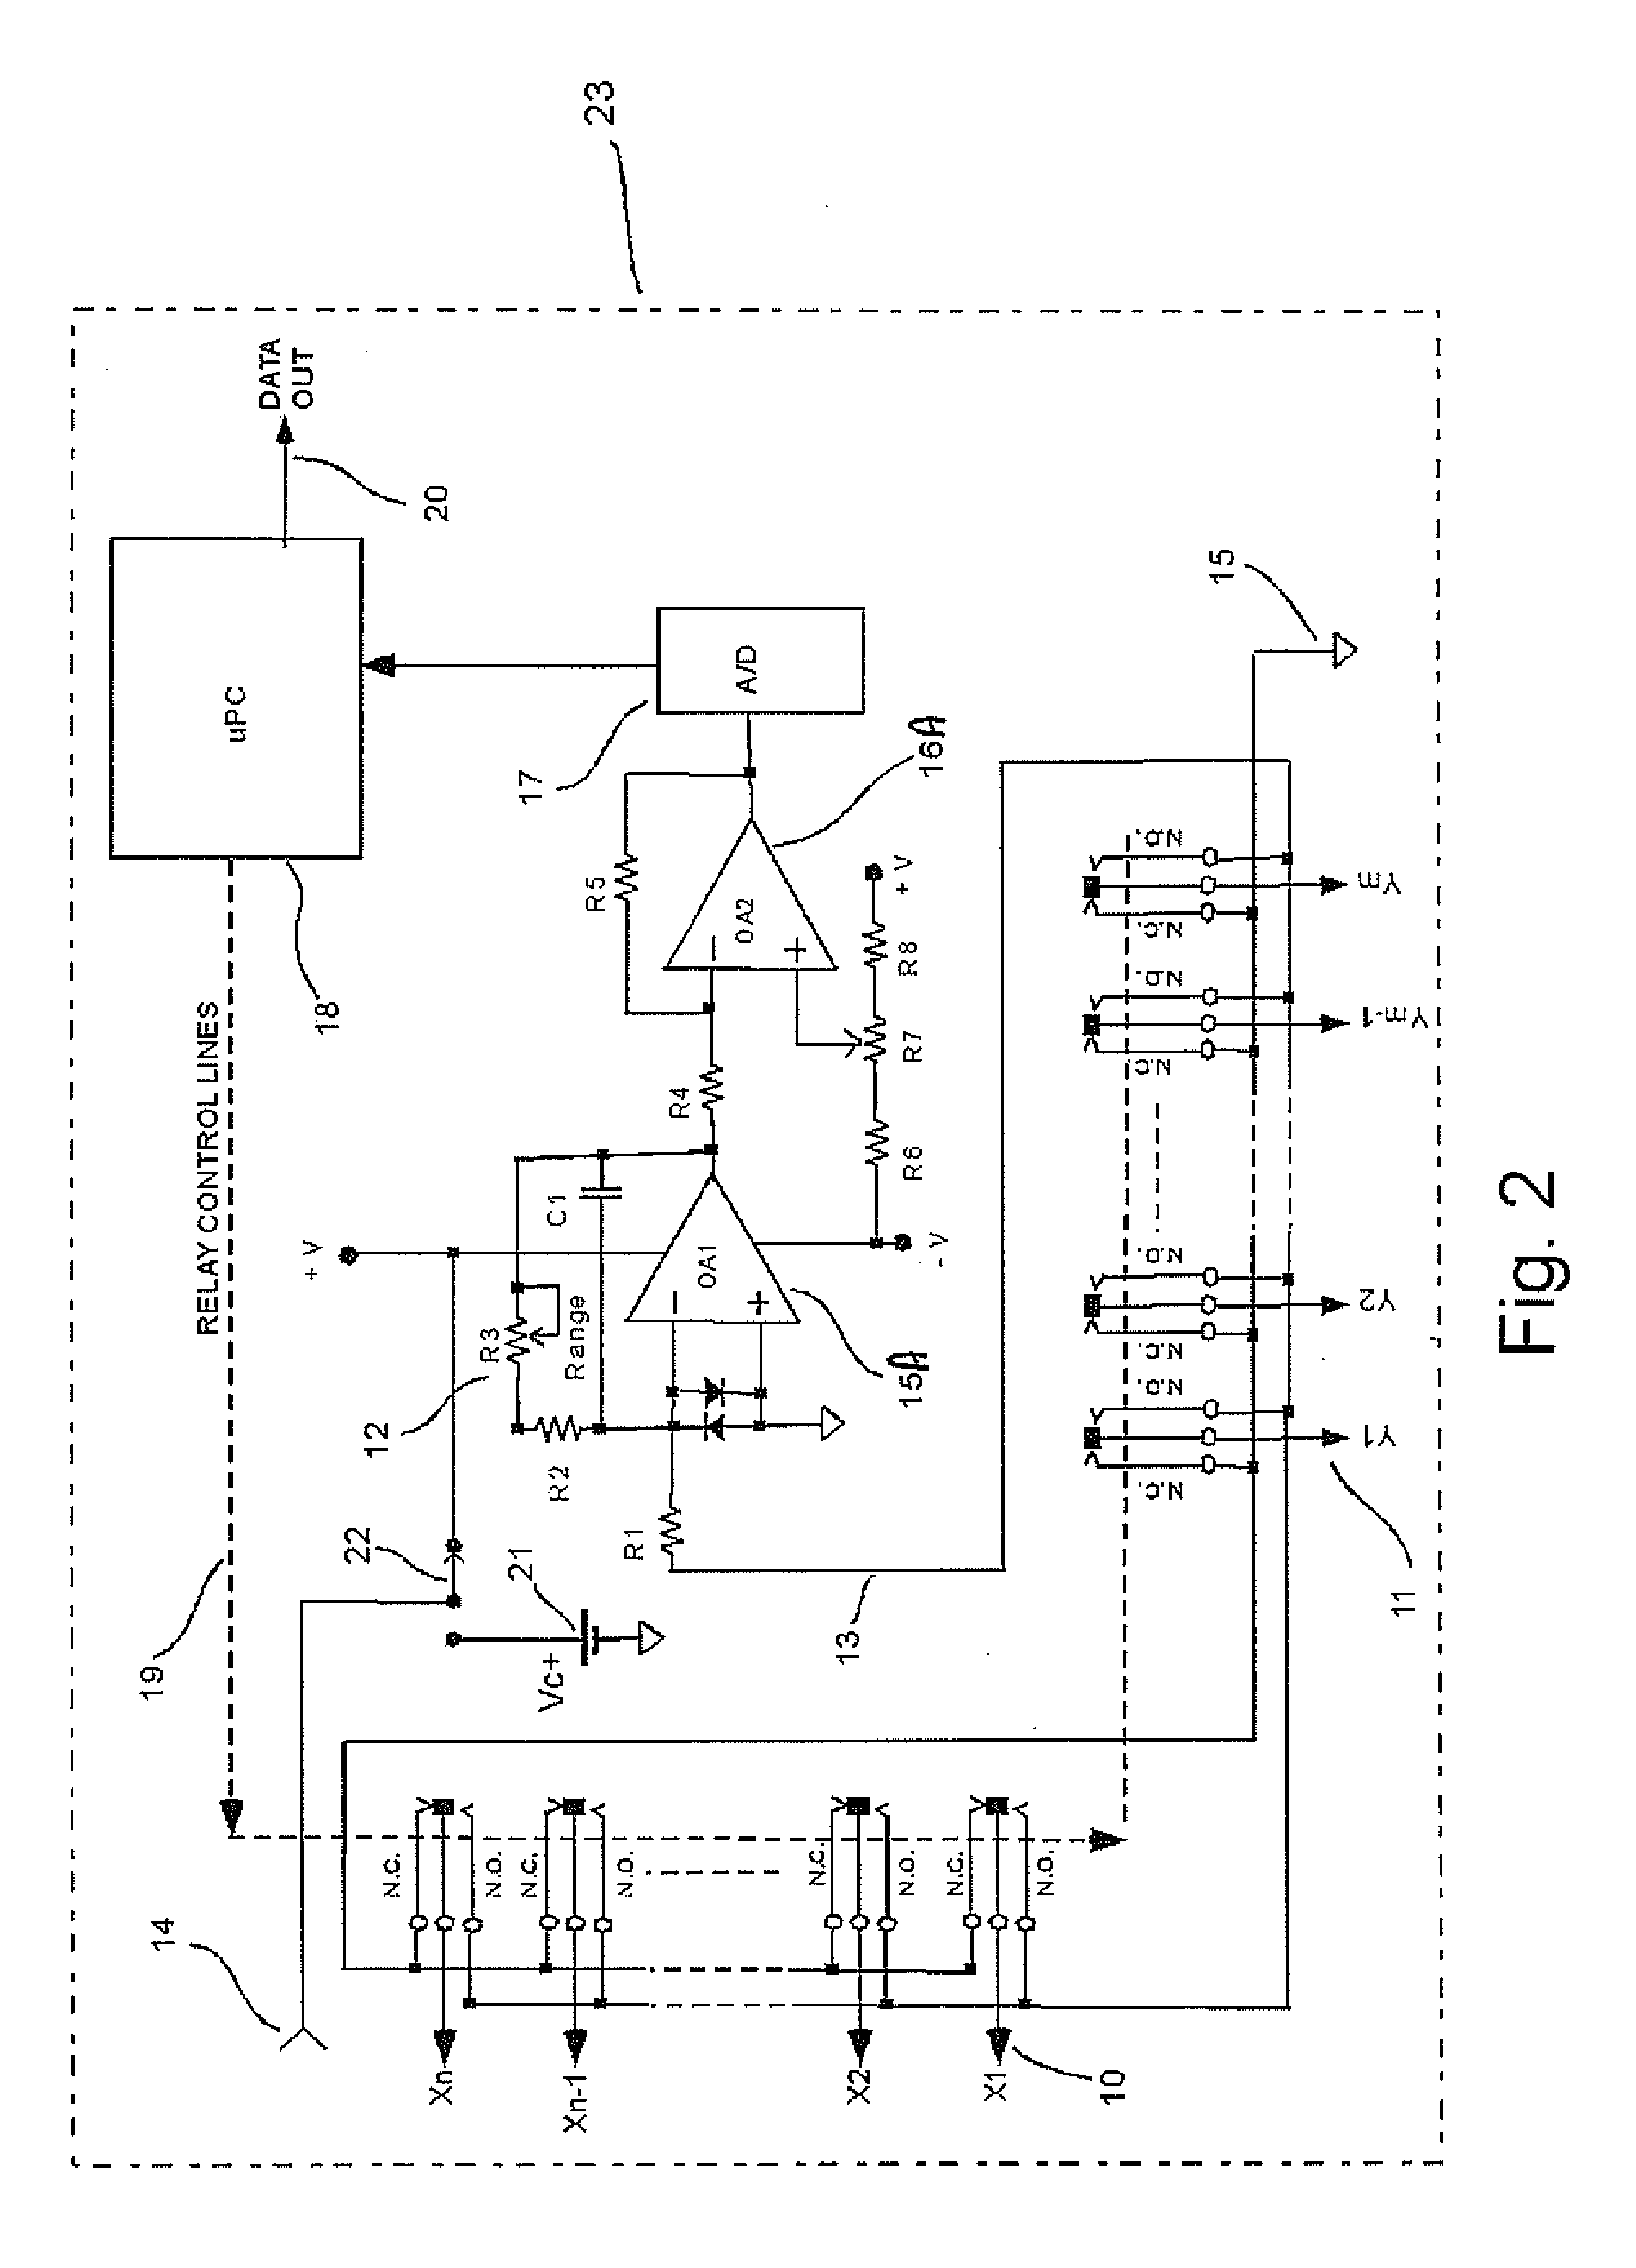 Method and apparatus to detect and locate roof leaks